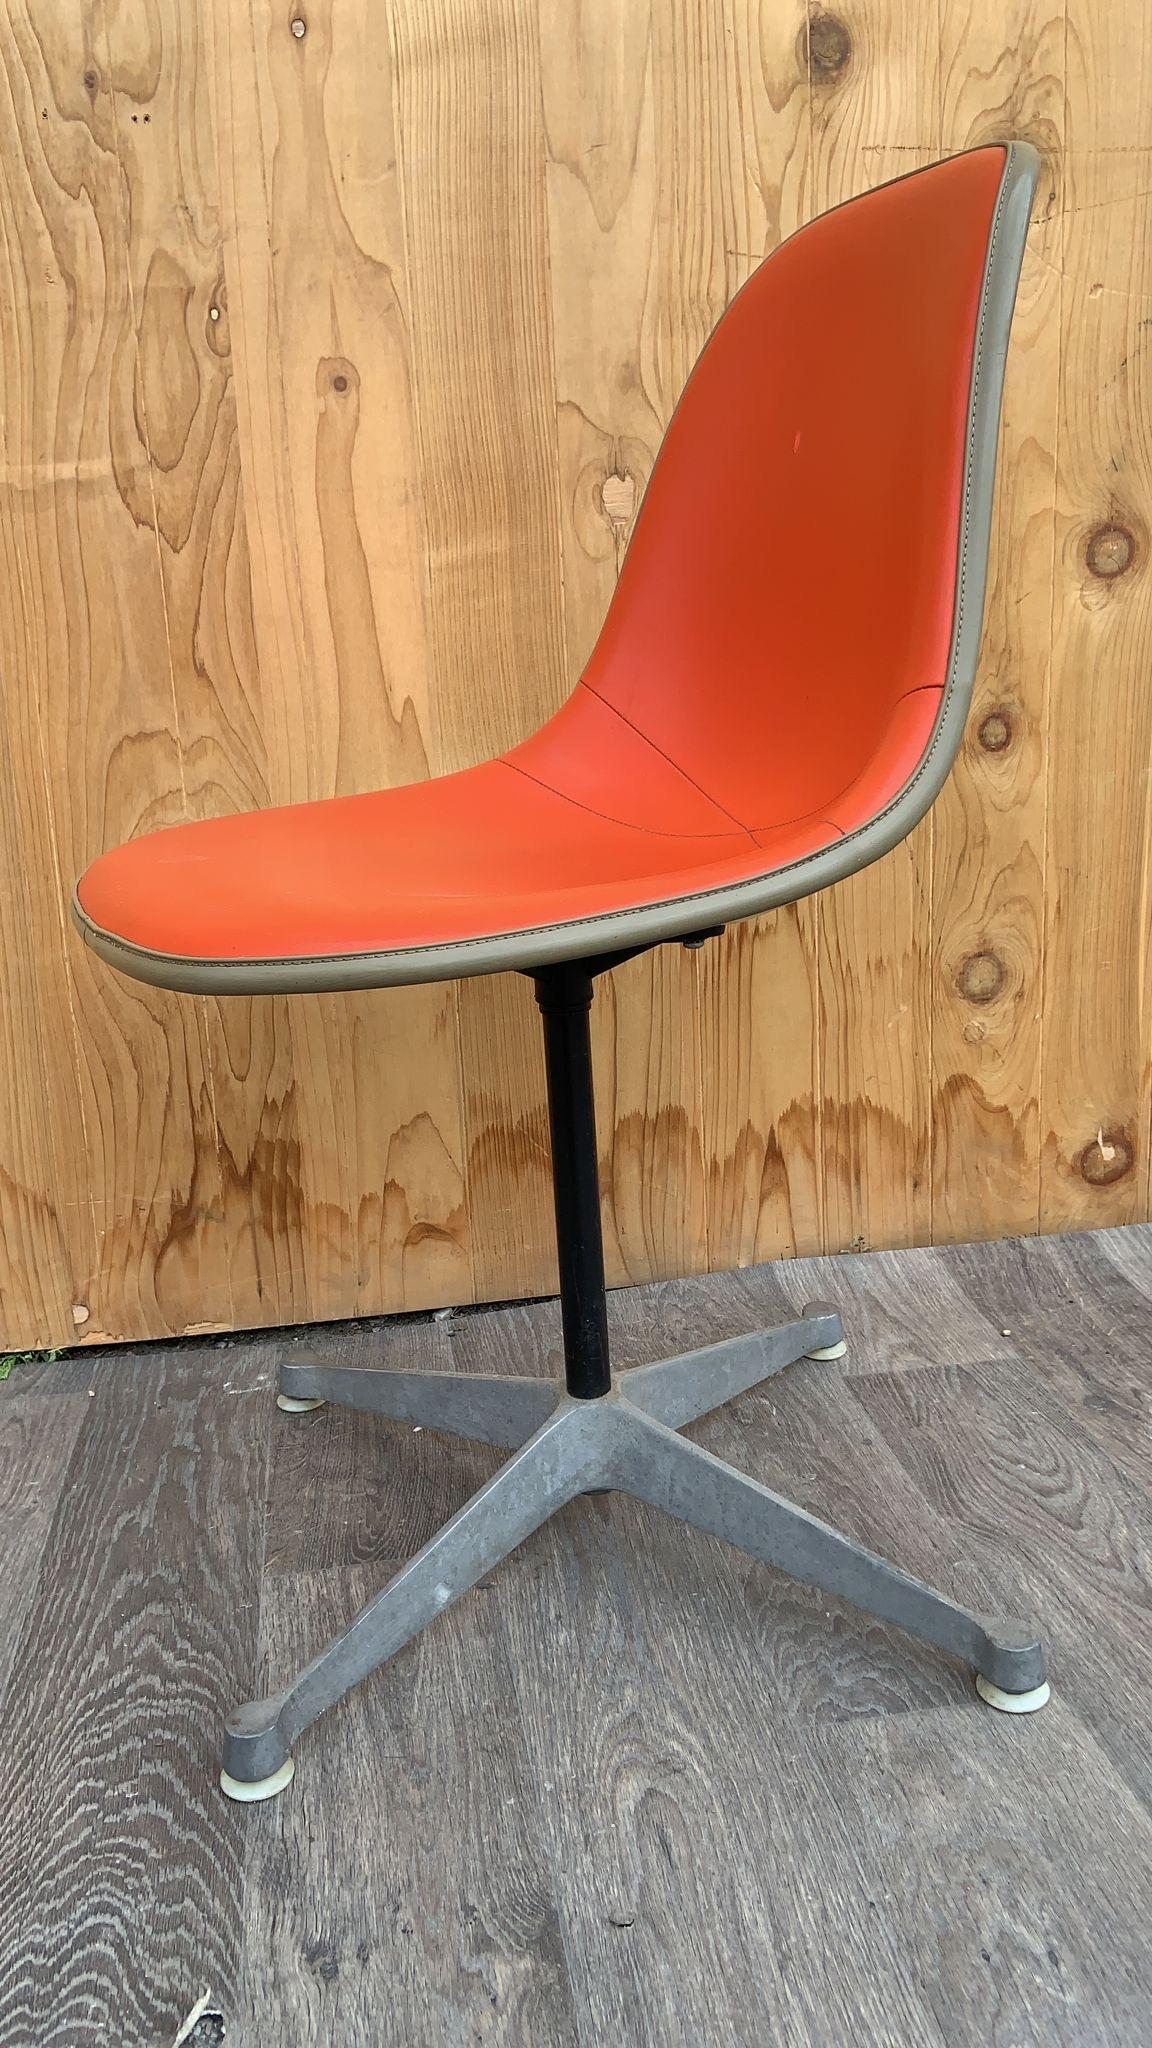 Mid-20th Century Mid-Century Herman Miller Swivel Shell Chairs in Red Orange Vinyl - Set of 4 For Sale